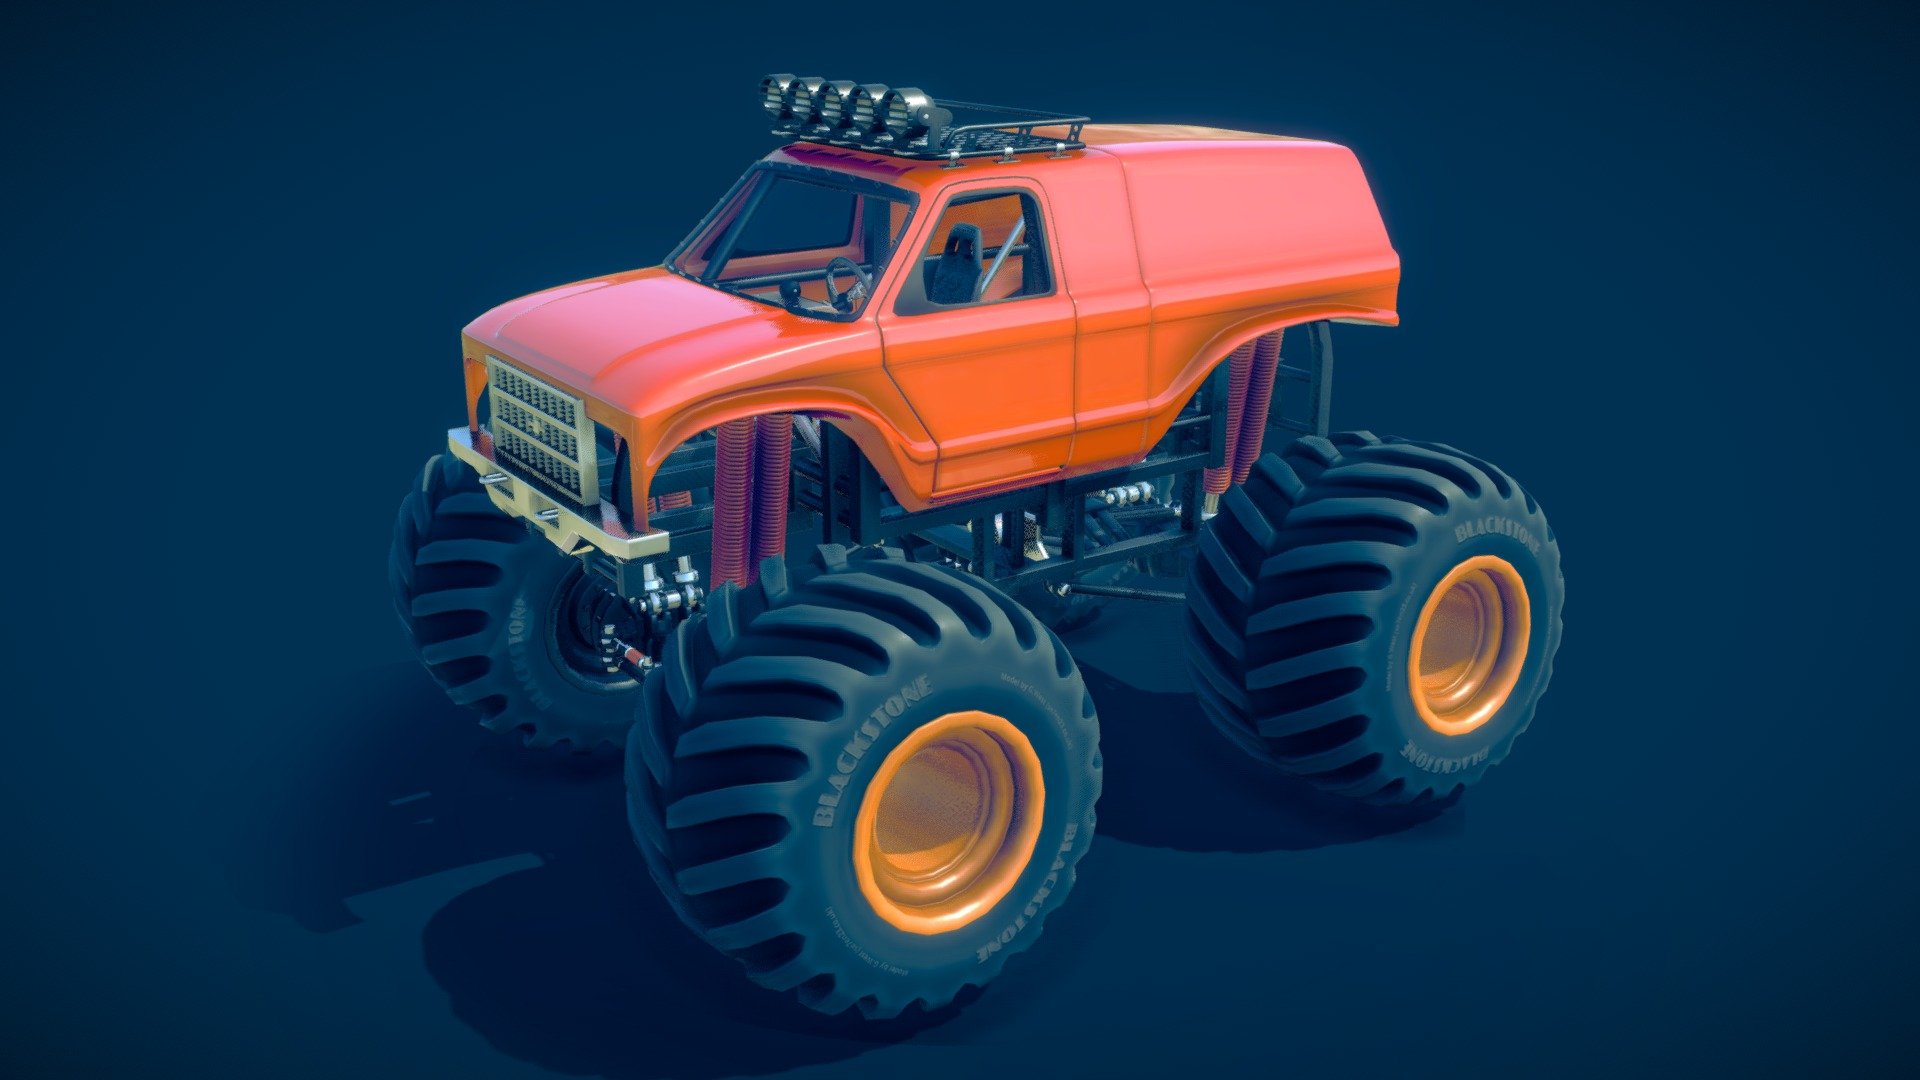 This is the low poly version of a monster truck I made quickly (due to the usual tight deadlines), and was part of a set of assets I created for a porridge advert a few years back.  You can find renders of the original version on my website here.

The additional download includes an untriangulated version of this low poly version, as well as the original cage mesh which can be smoothed to a higher degree to match the original version I rendered for the advert.

If you purchase this model then please send me a message to tell me about your project, I'd love to see what you create with it! - Monster Truck - Buy Royalty Free 3D model by se7en23 3d model